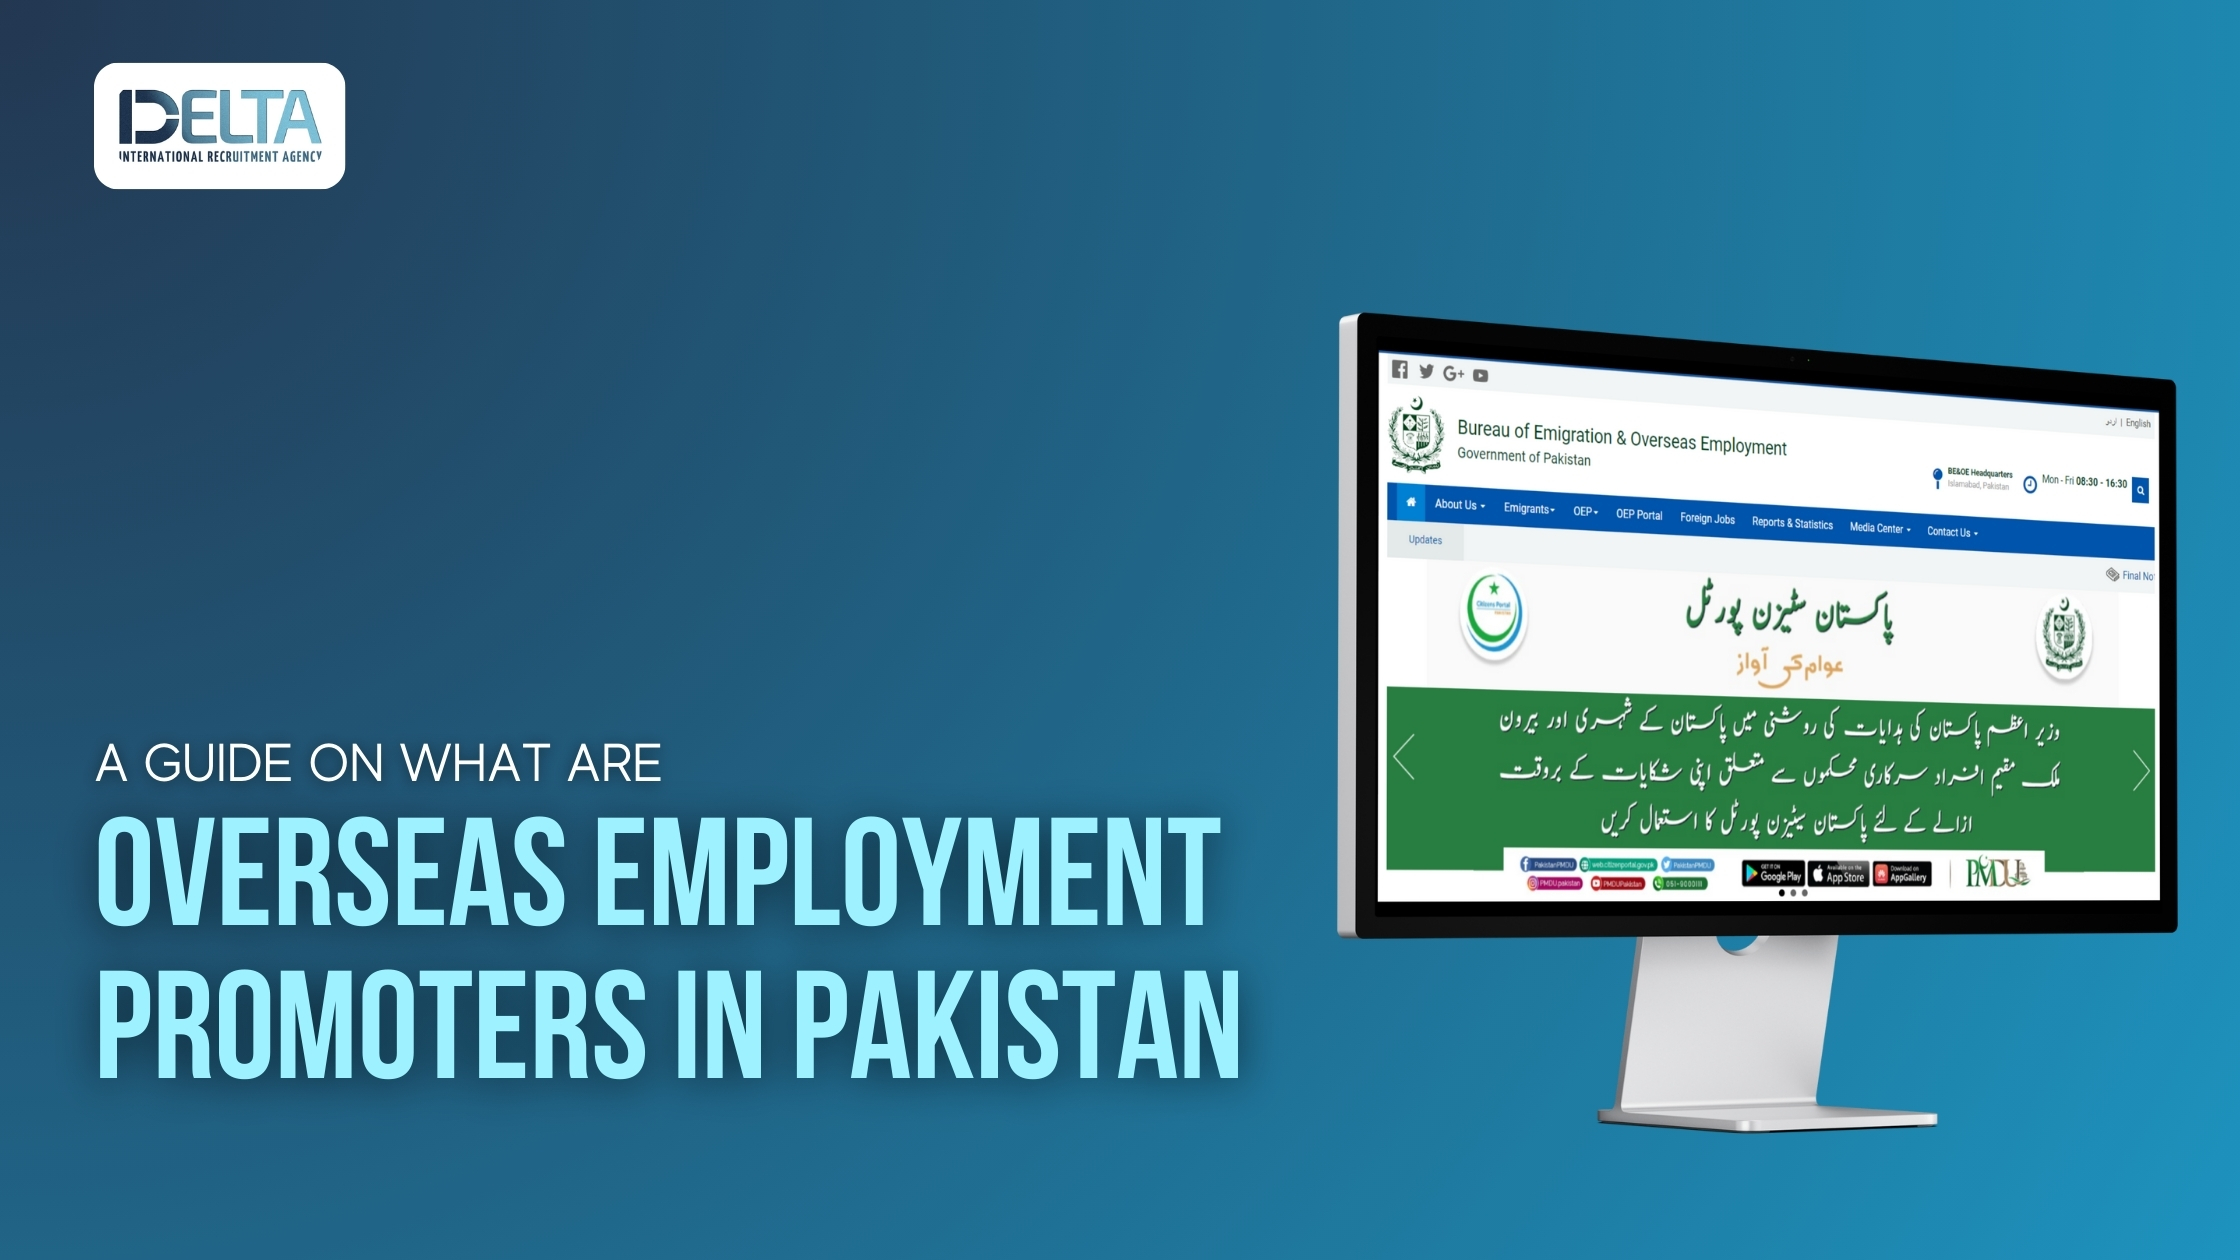 A Guide on what are Overseas Employment Promoters in Pakistan